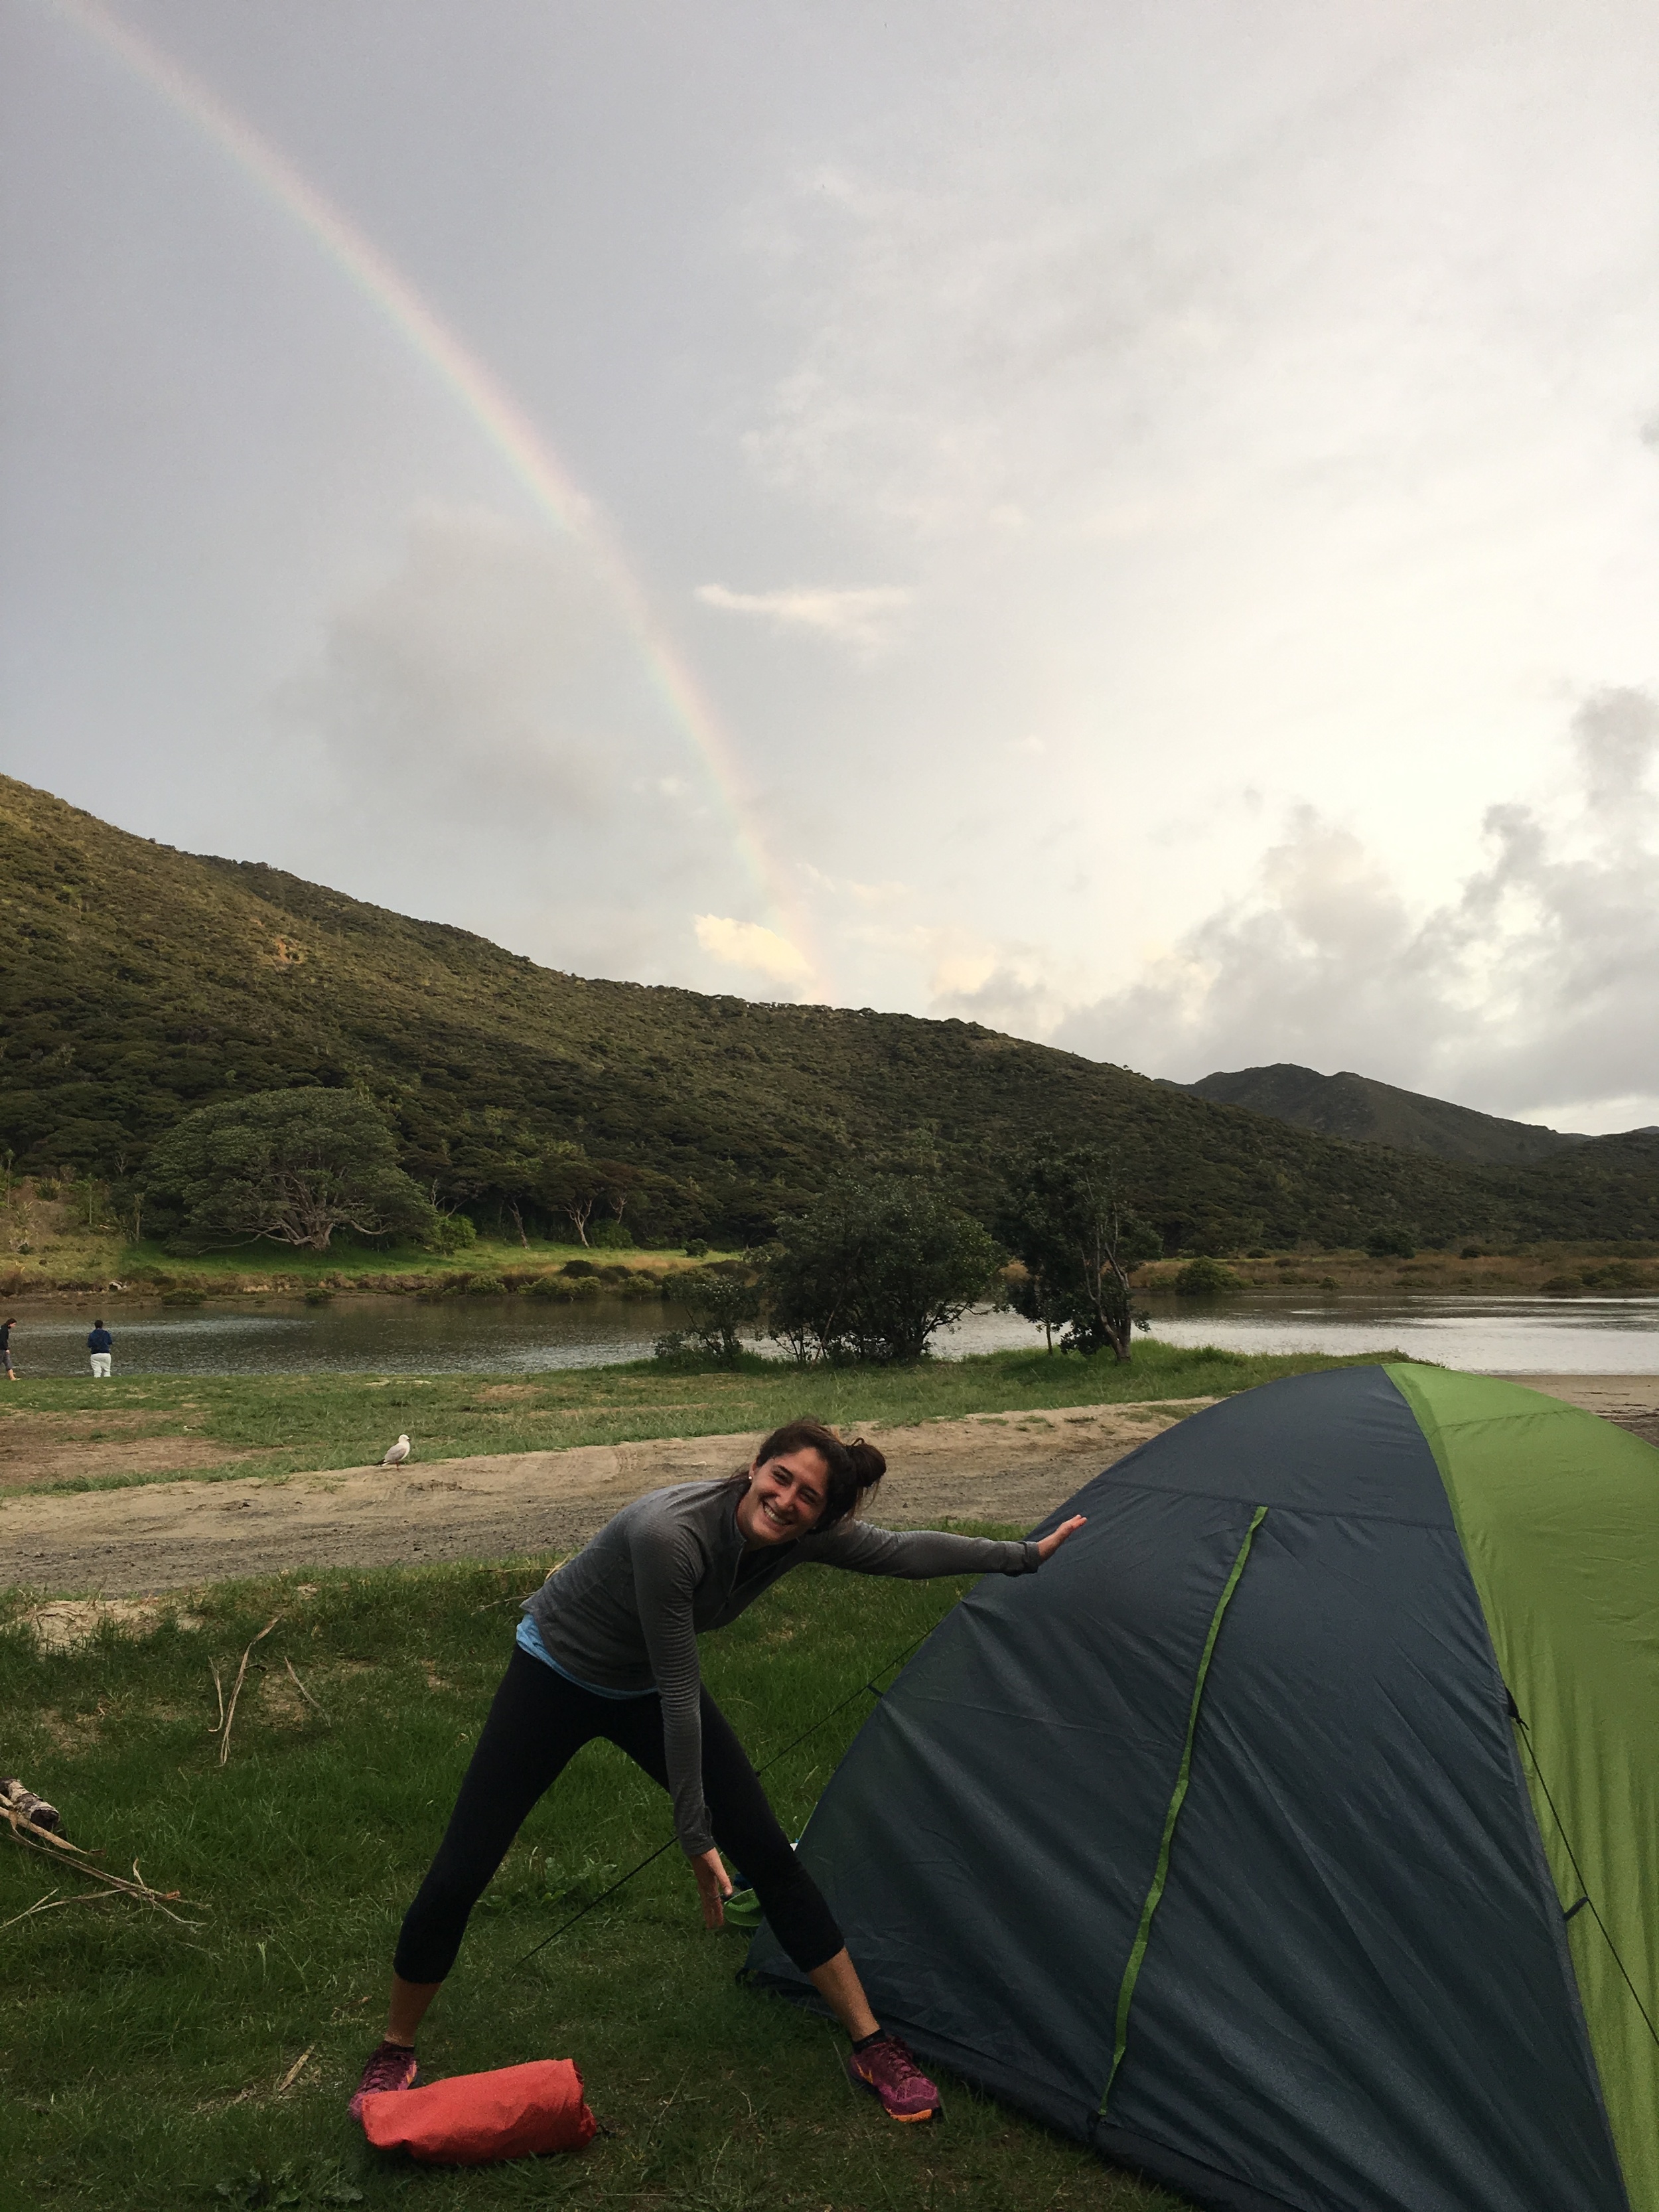 Camping at the end of the rainbow